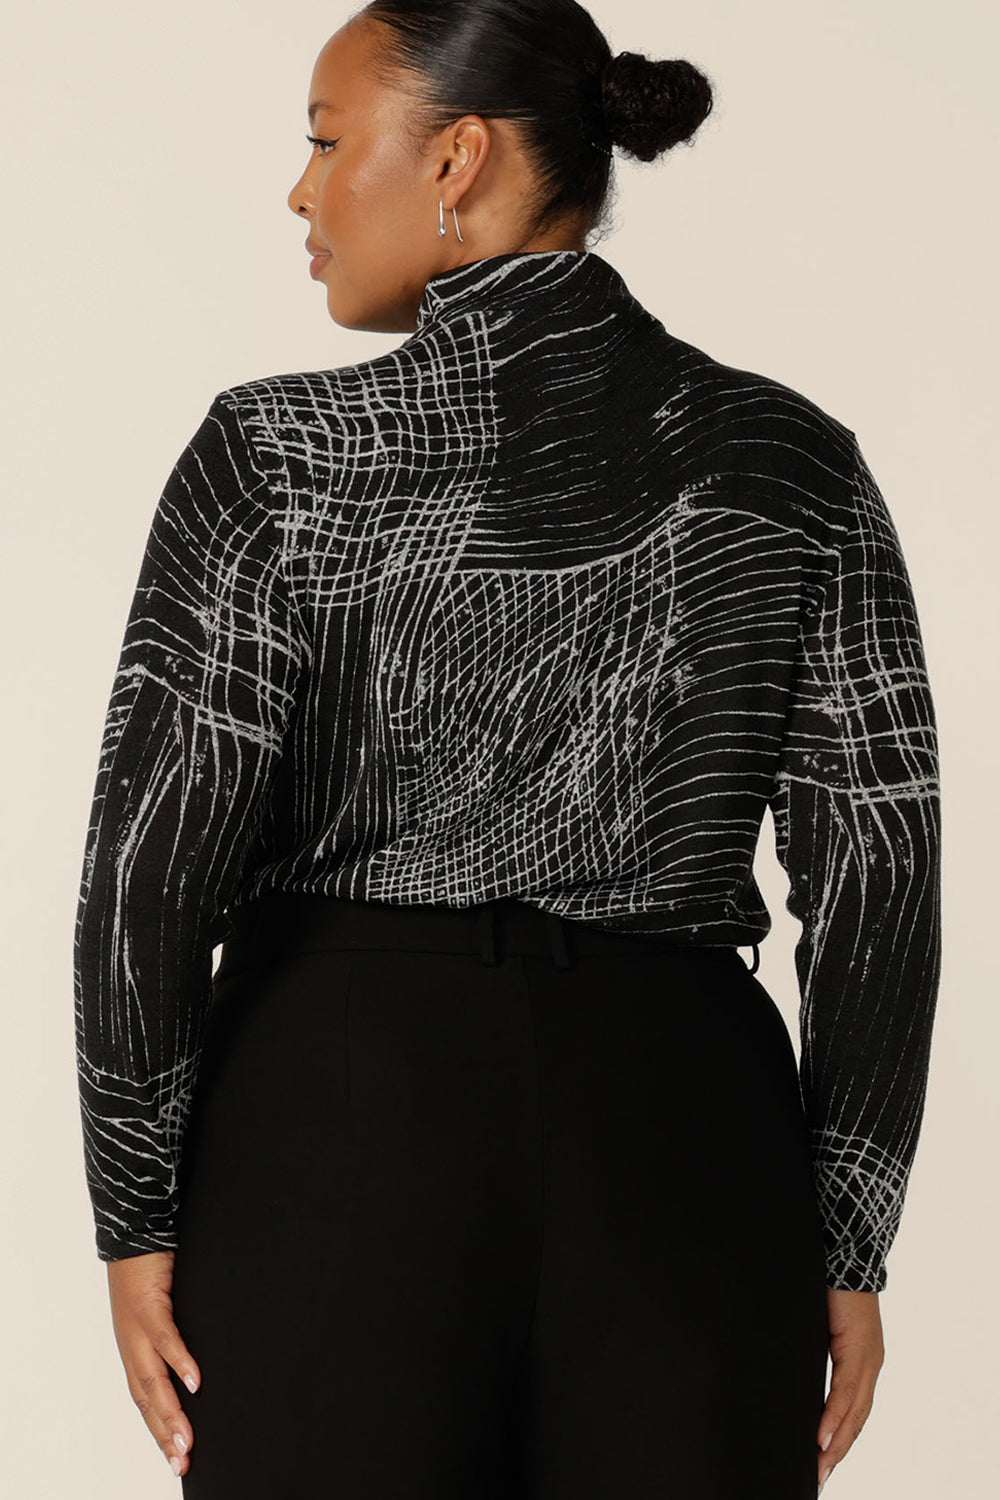 Back view of a fuller figure woman wearing a long sleeve, woolly knit turtleneck top, size 18, in an abstract black and white pattern. A warm winter top, this women's polo neck top by Australian and New Zealand women's clothing label, L&F is available to shop in inclusive size range of sizes 8-24..